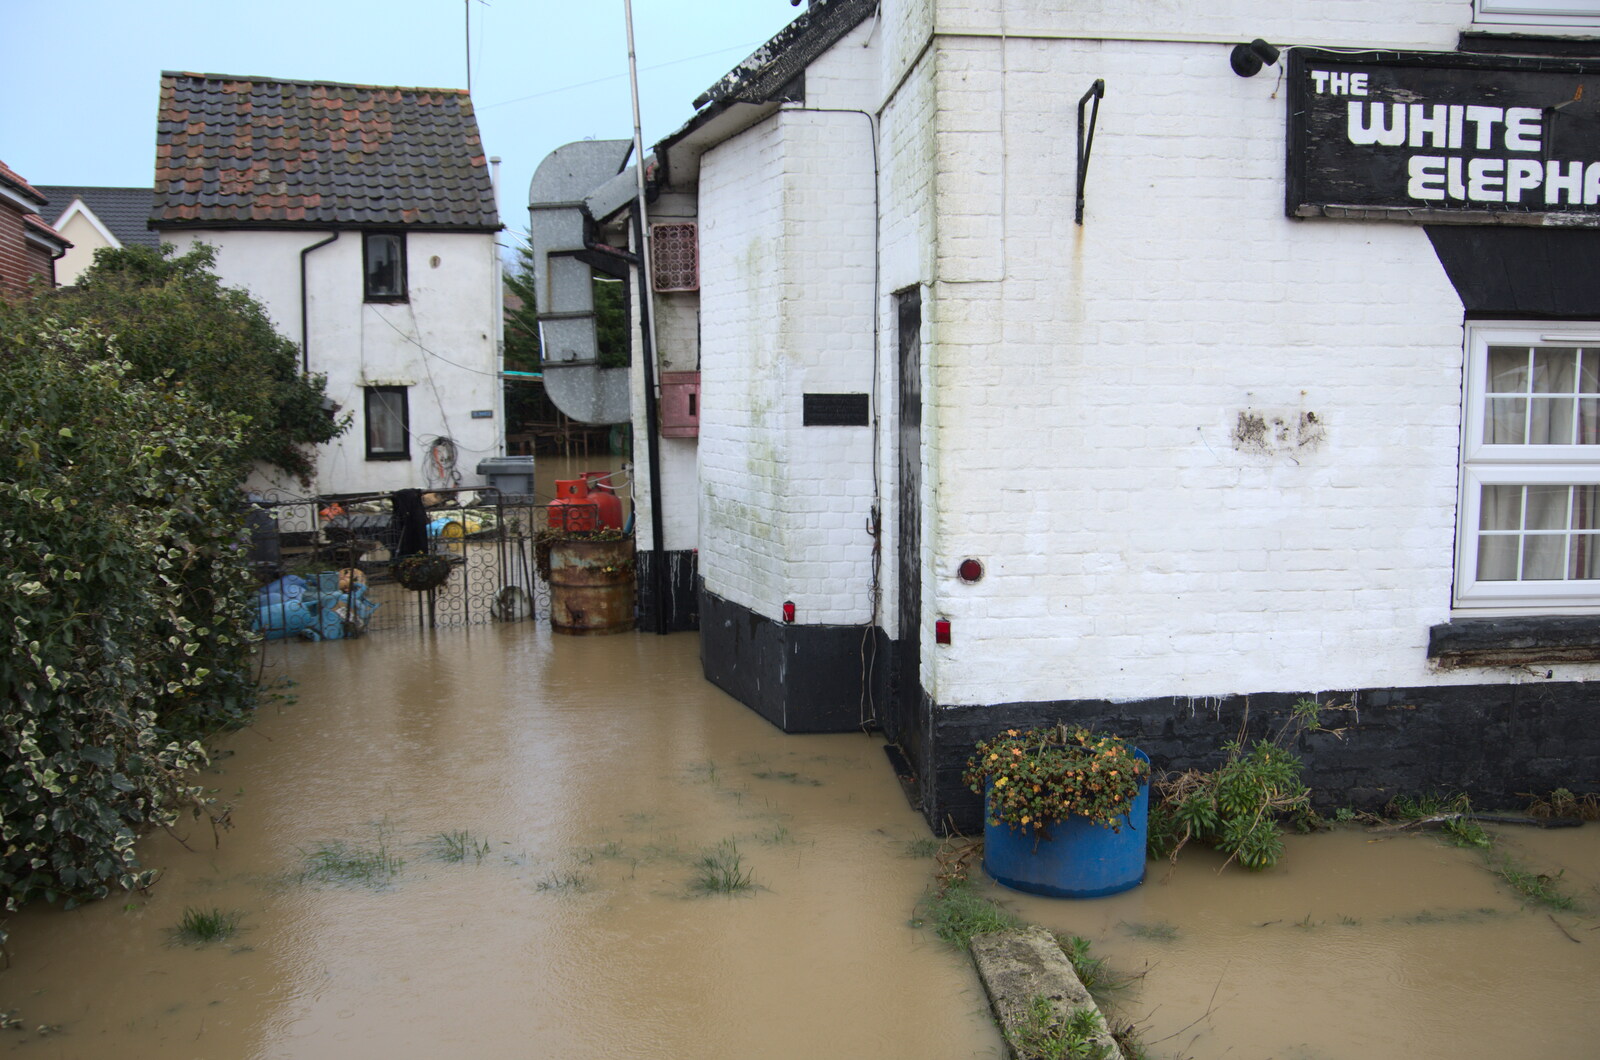 The small house by the White Elephant is surrounded from The Christmas Eve Floods, Diss, Norfolk - 24th December 2020